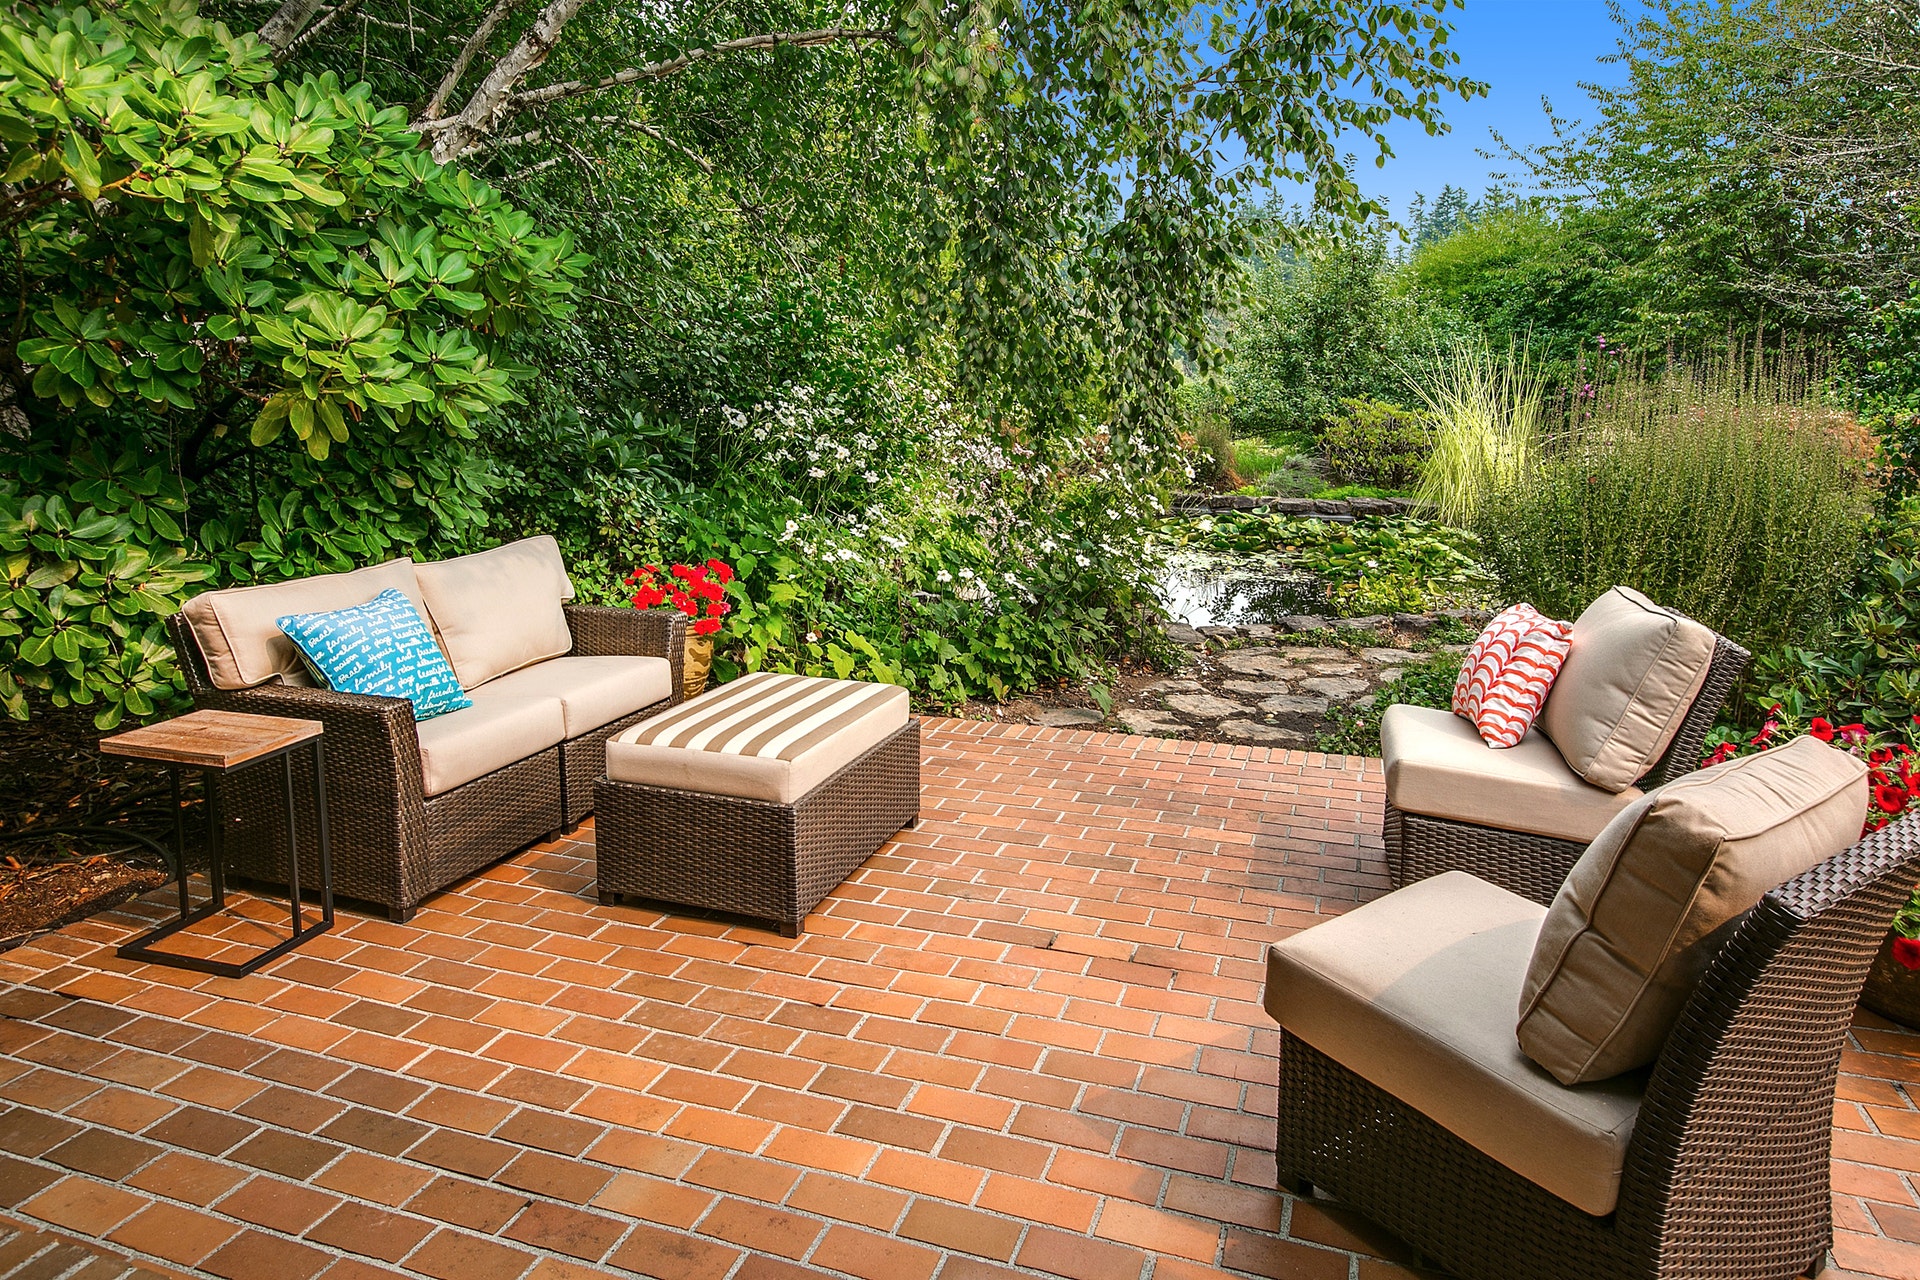 A restful brick patio and fish pond invites relaxation just outside the living/dining rooms